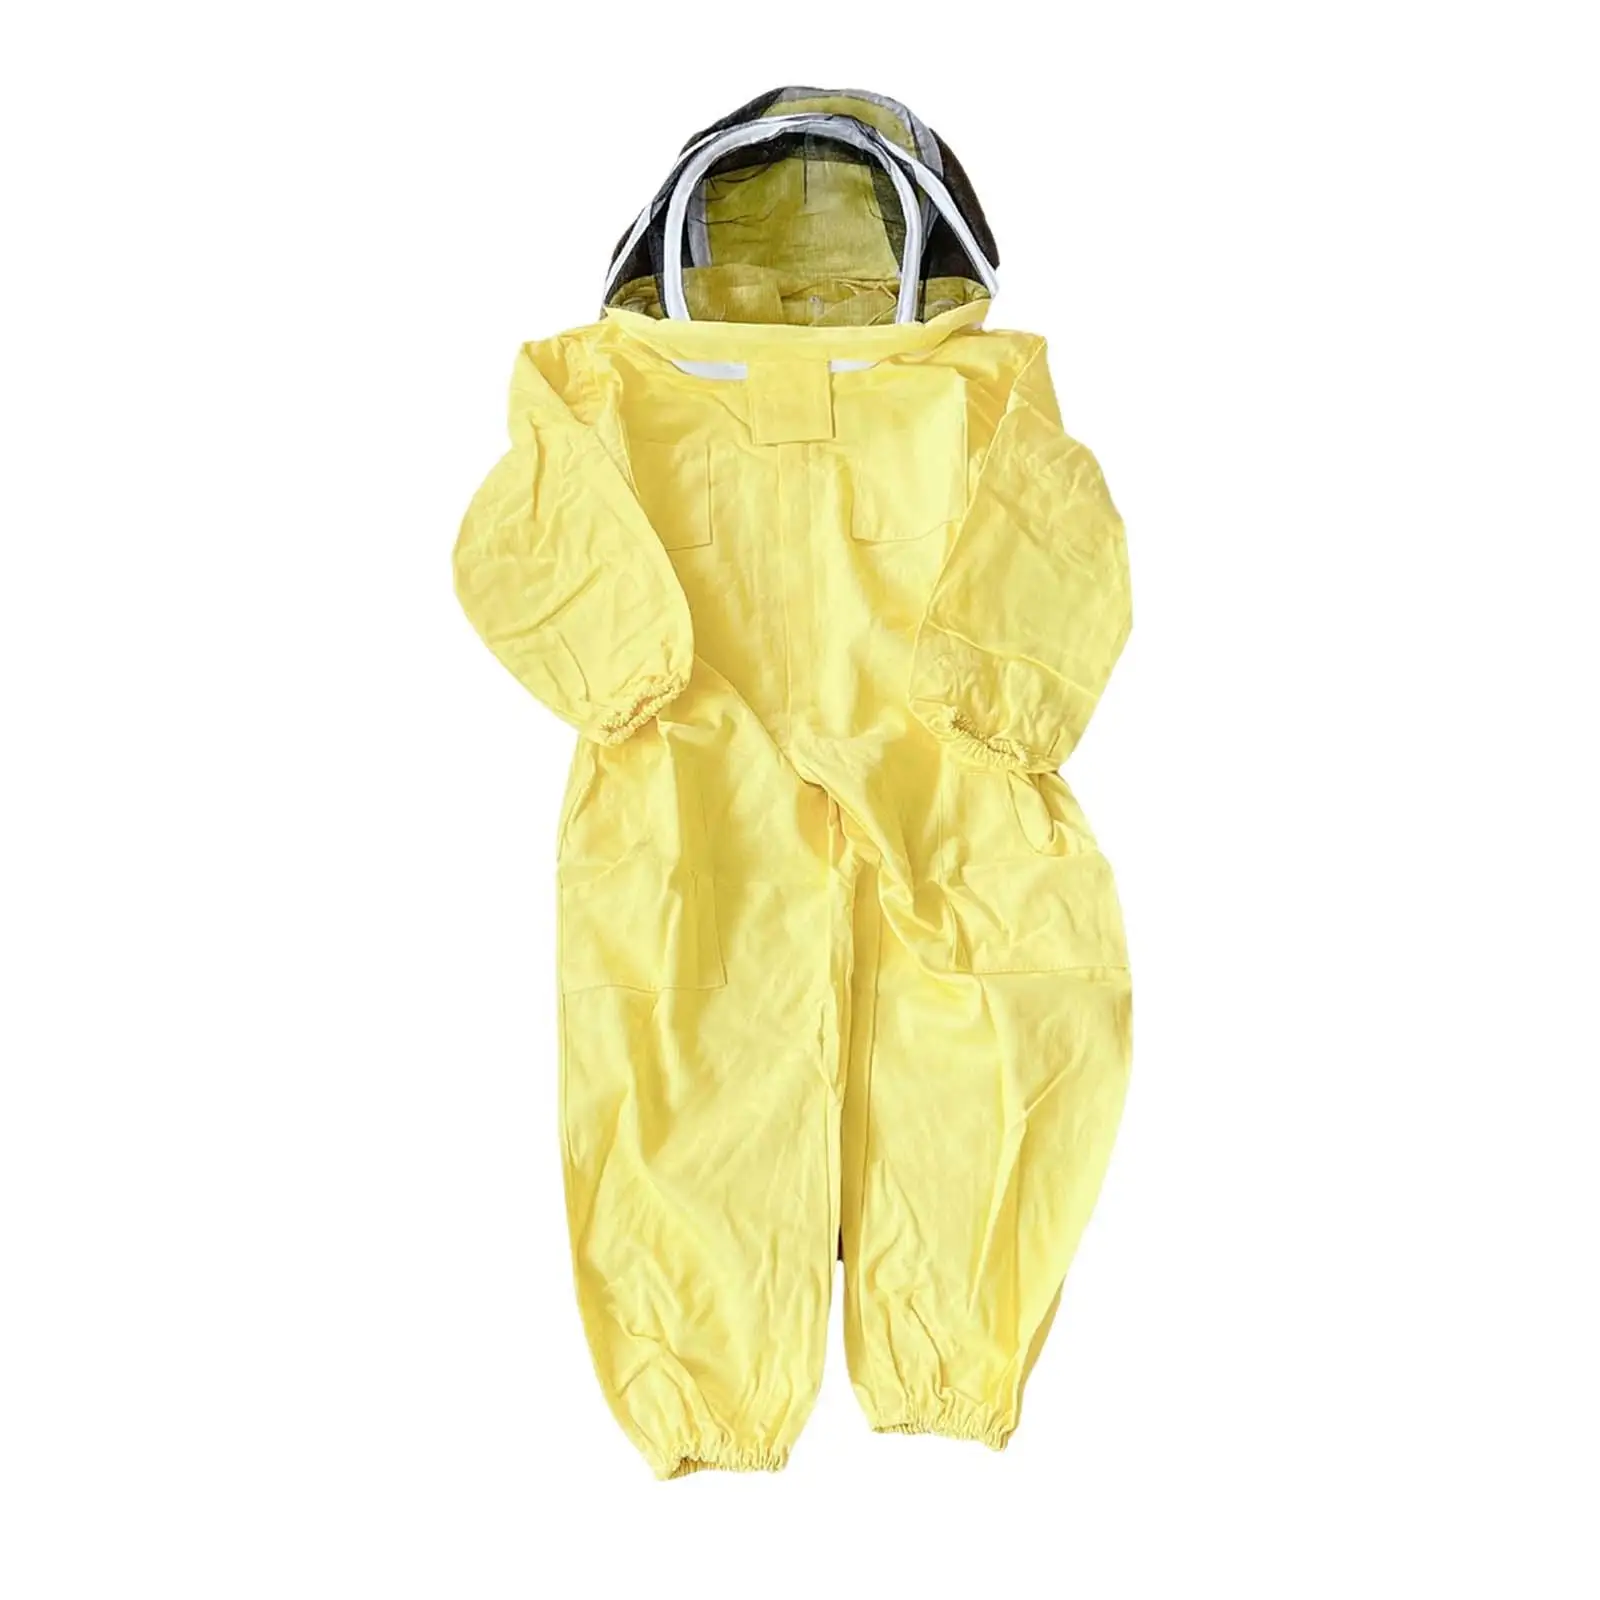 Kids Beekeeper Suit Full Body Beekeeping Suit with Ventilated Fencing Veil Hood Protective Equipment Clothing for Boys Children